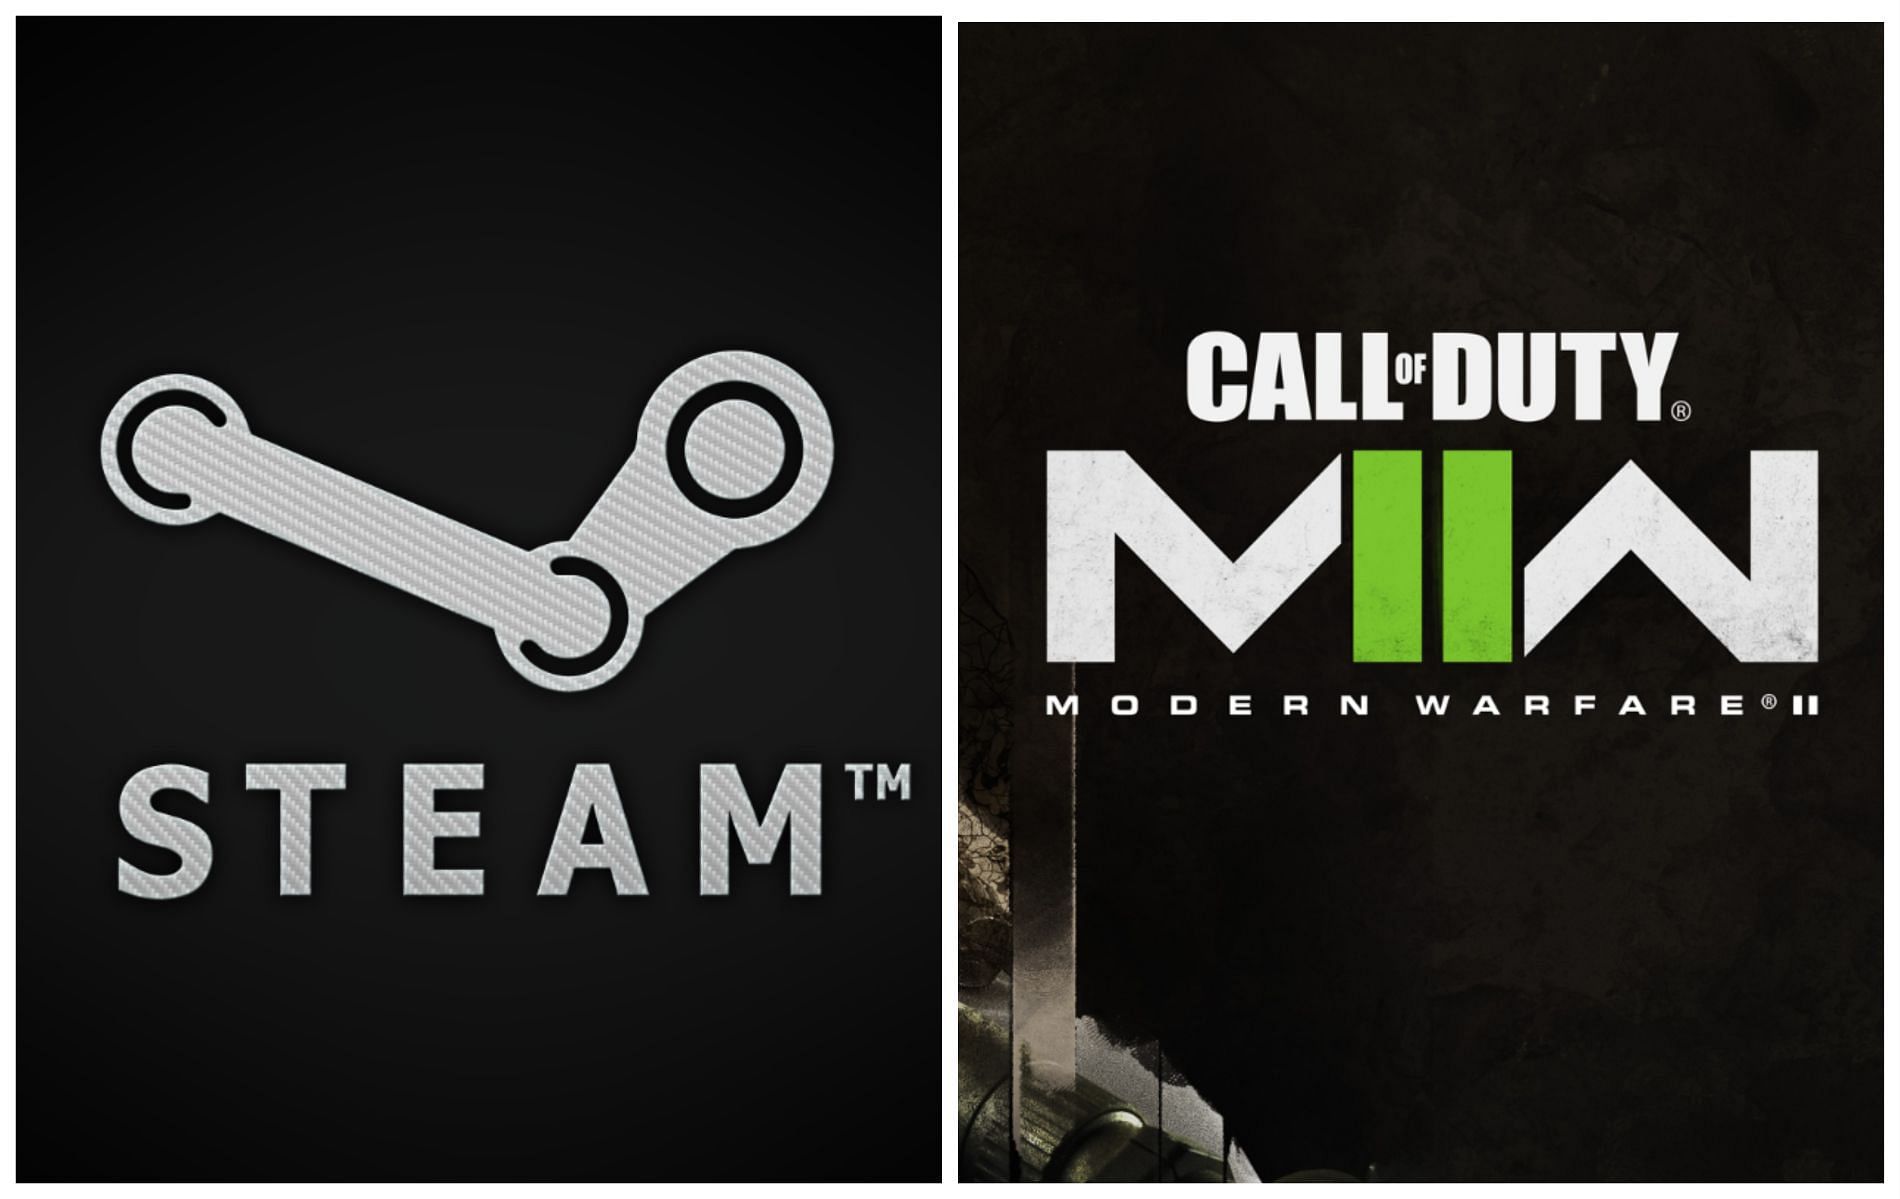 Modern Warfare 2 will be available on Steam, confirmed (image via Steam, Activision)